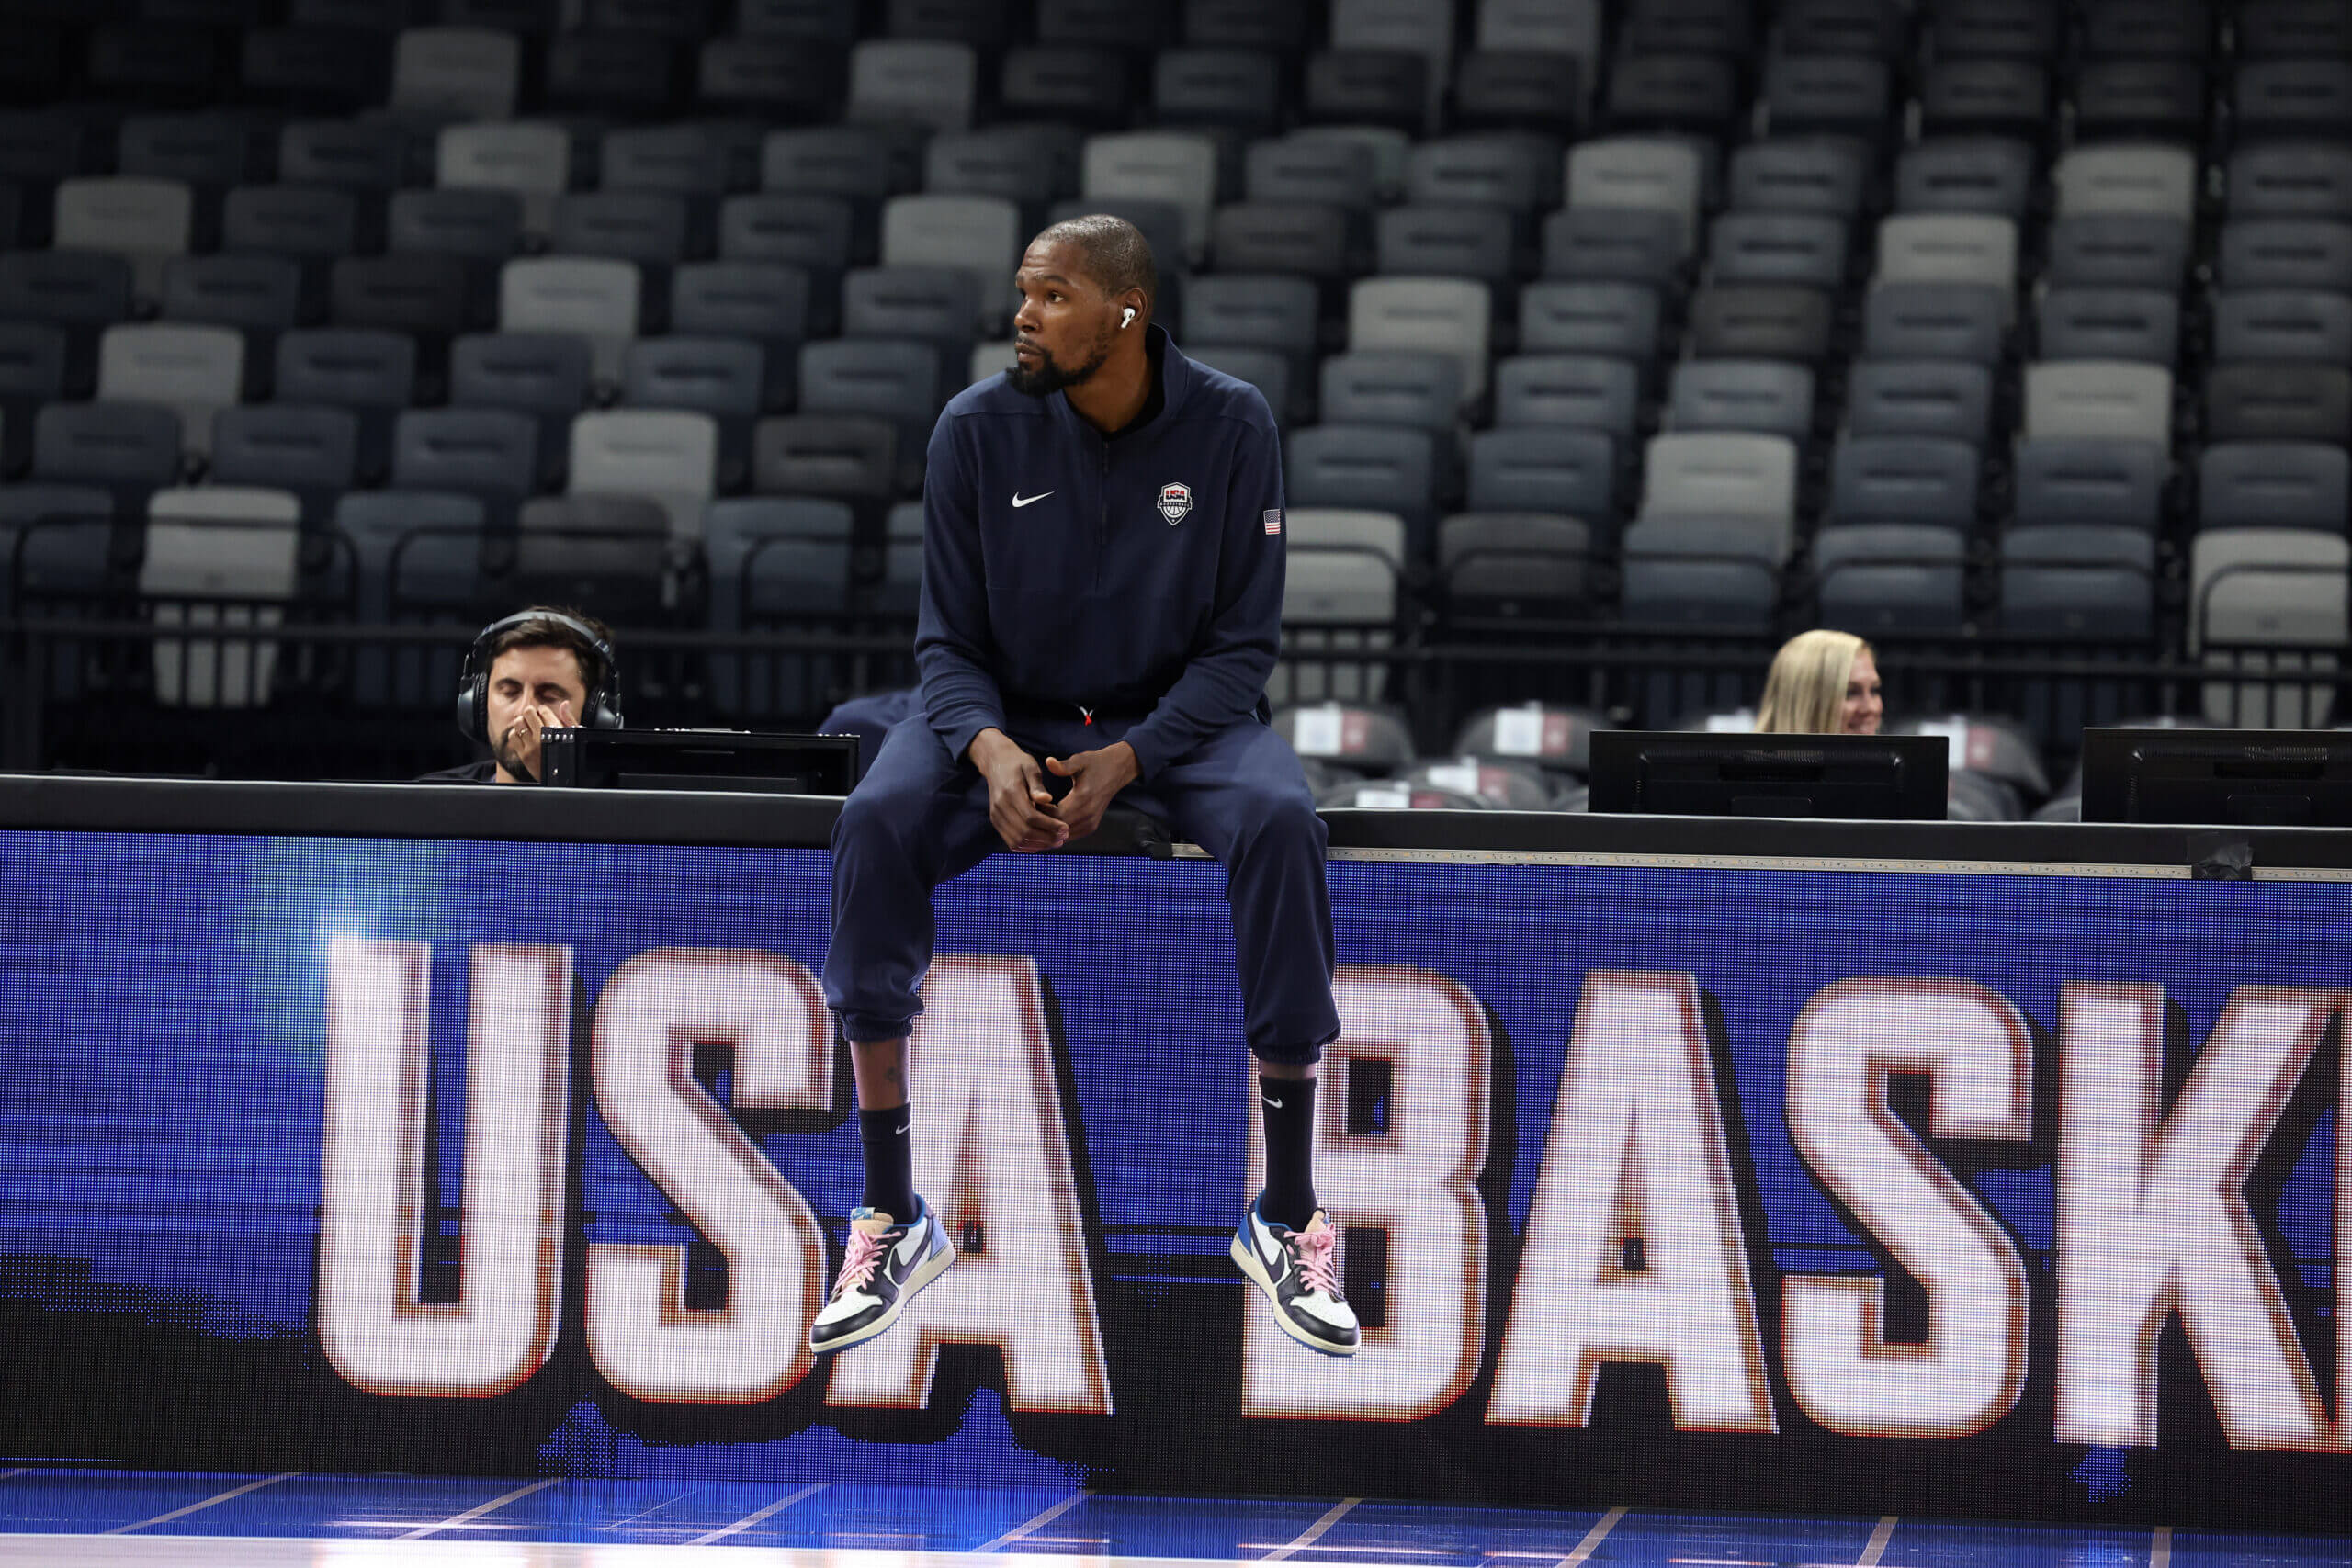 Durant practices with Team USA for first time after calf strain